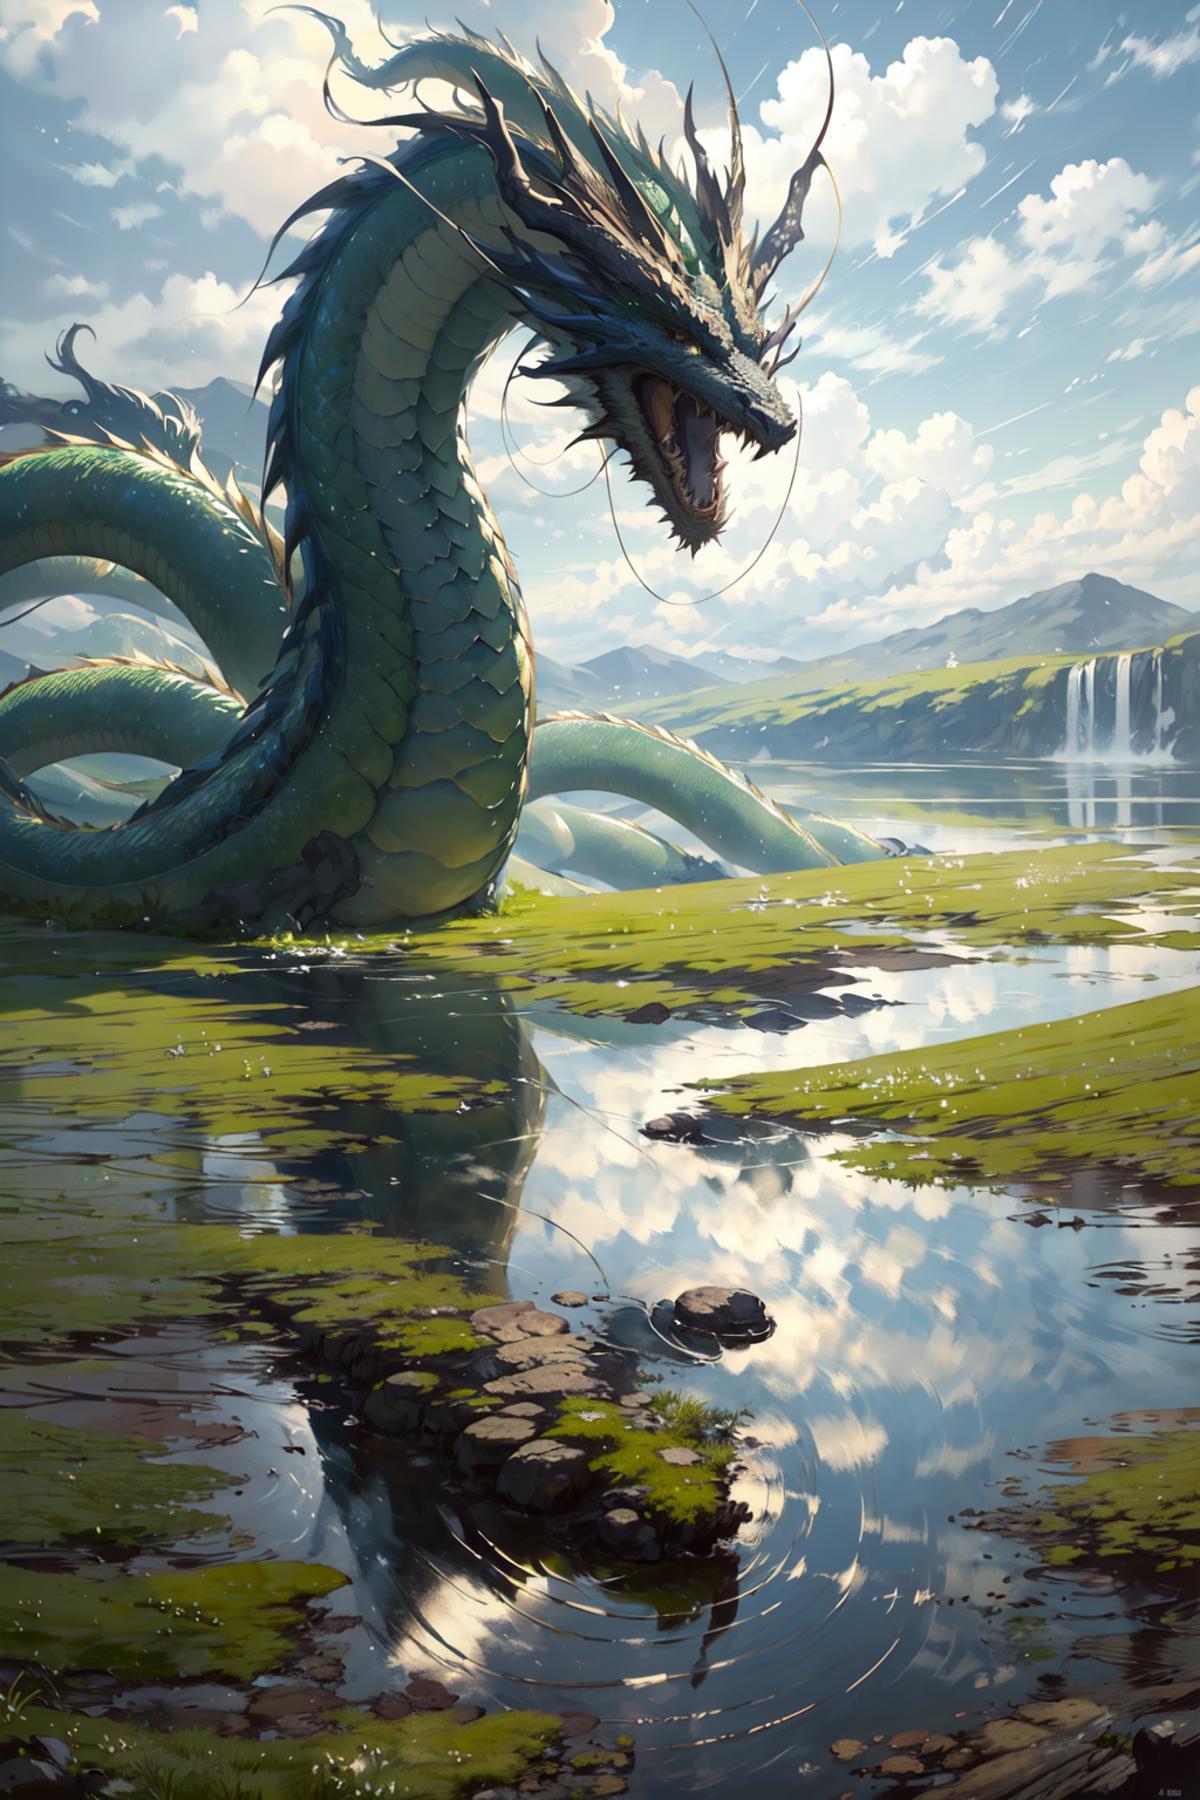 A dragon standing in a lake with mountains in the background.